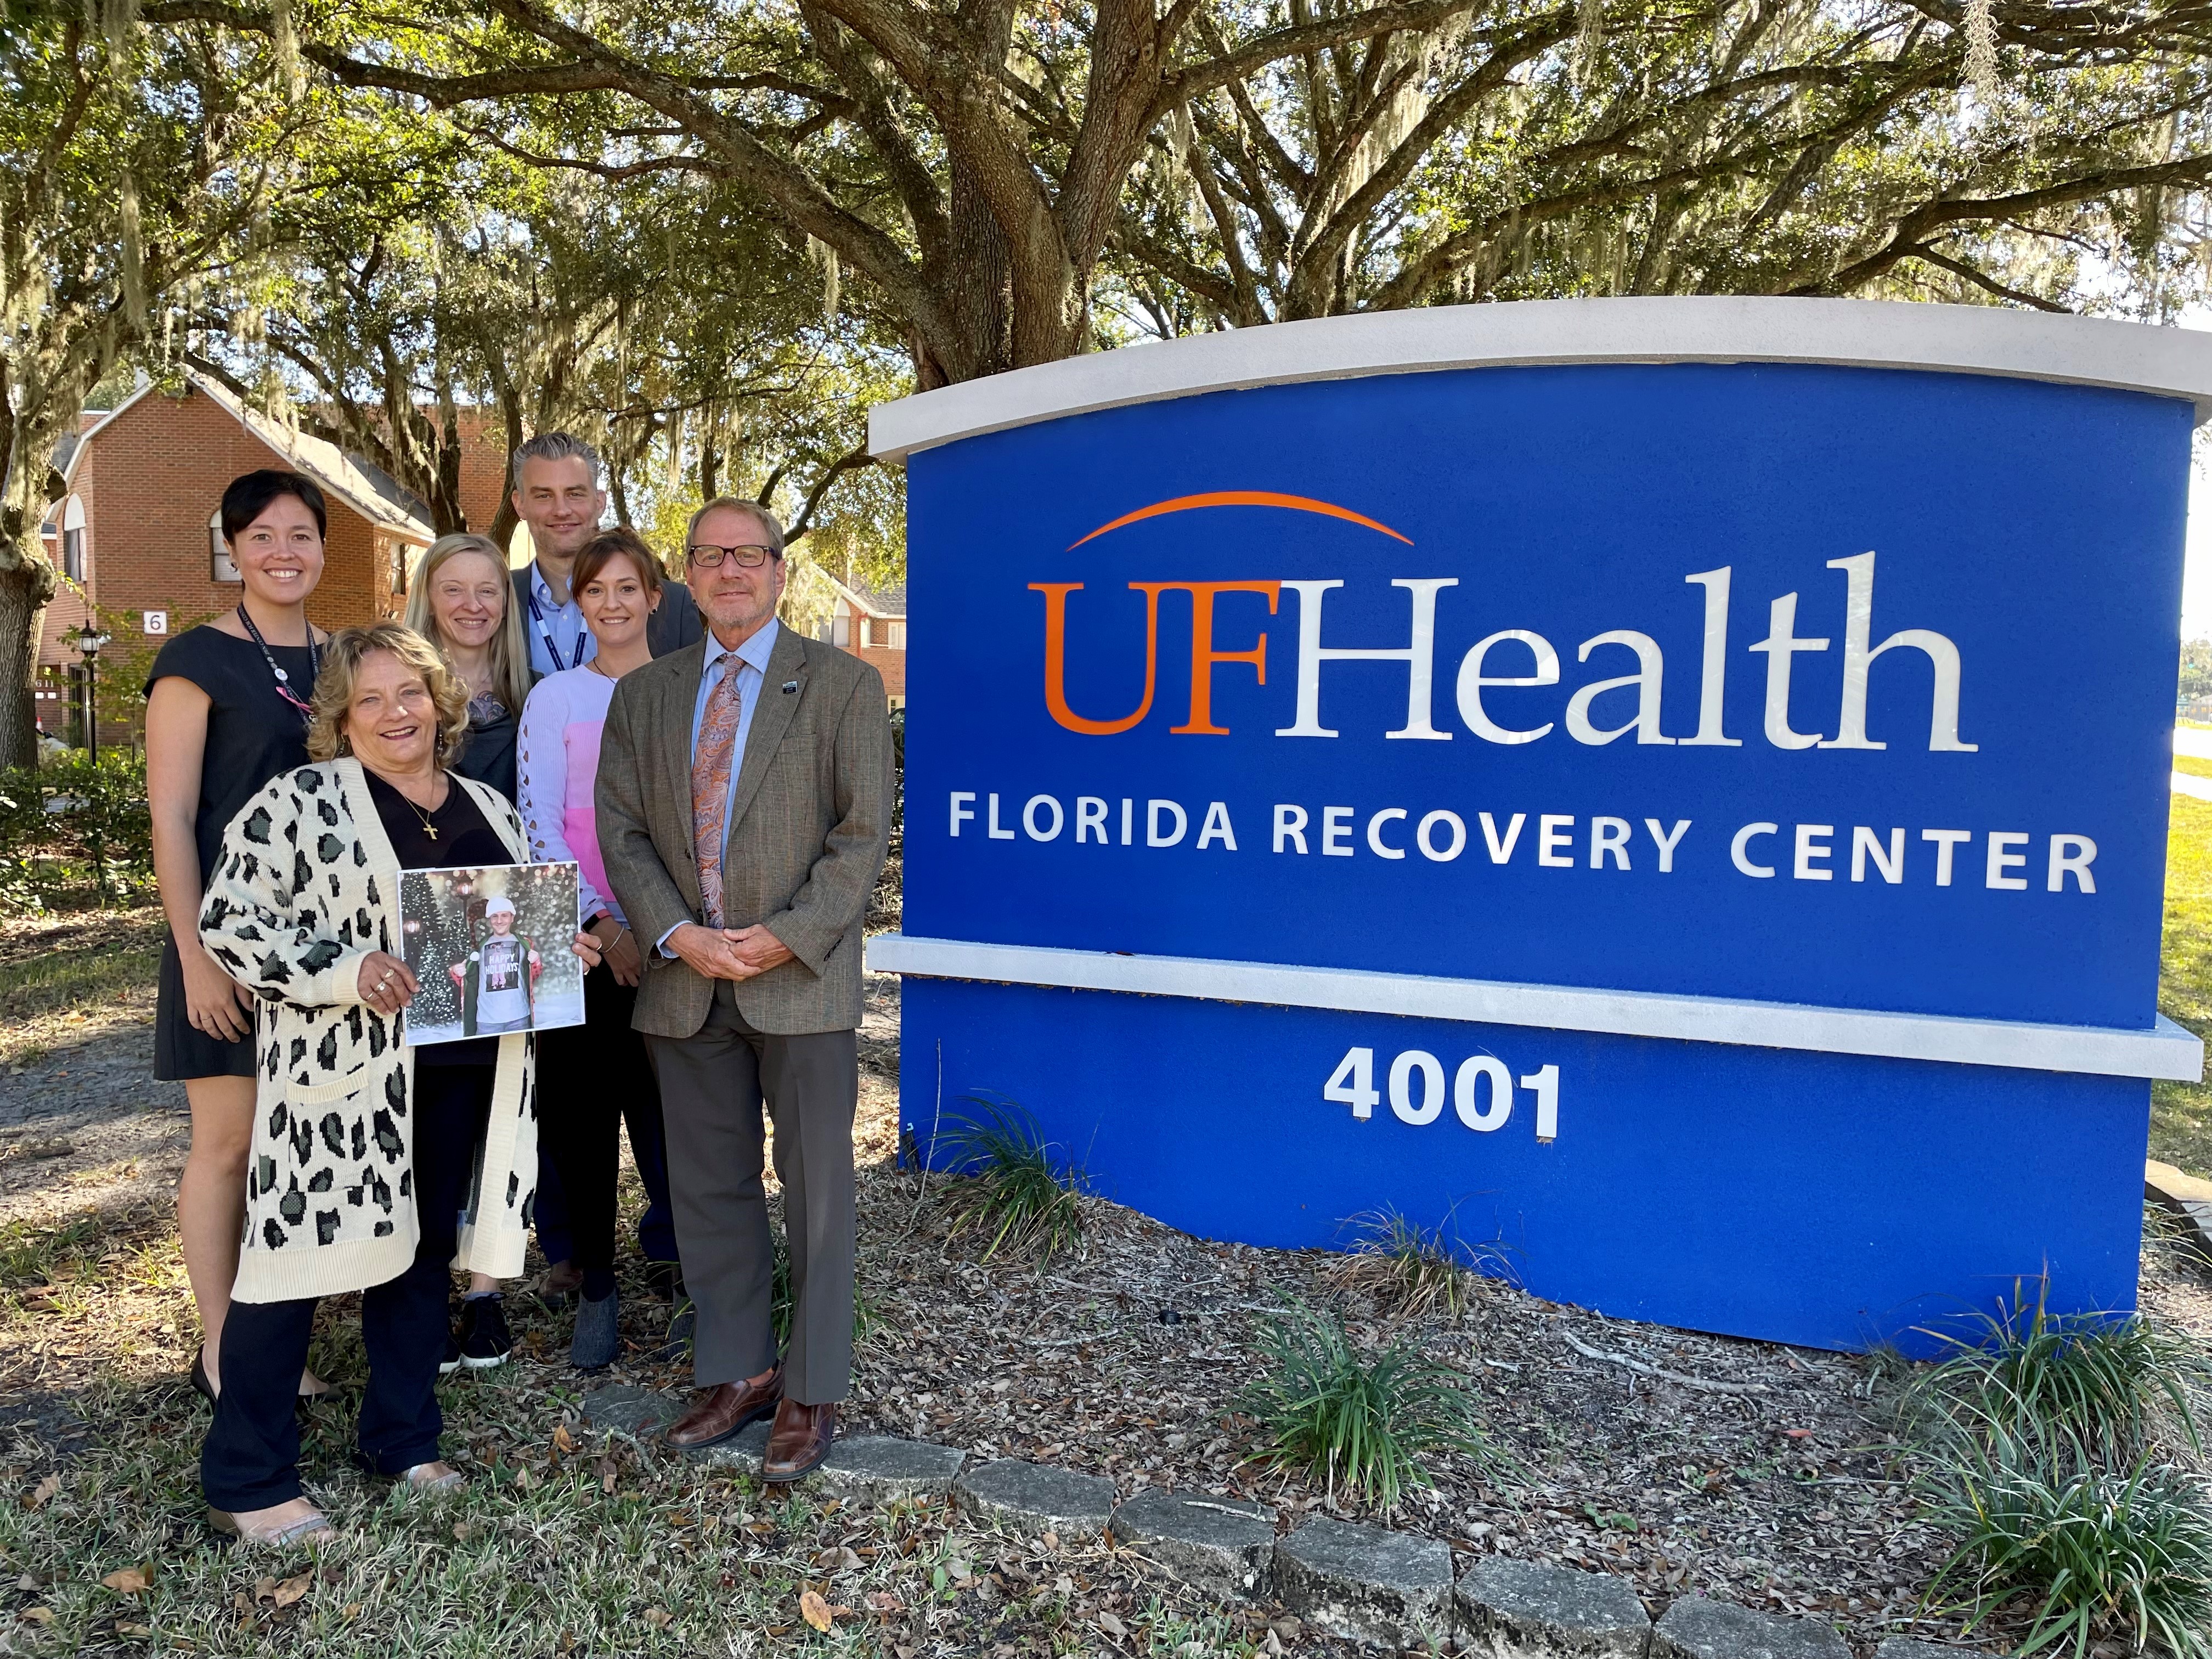 Debbie Knight, front left, holds up a picture of her son, Ryan Brown, who passed away in July 2021. From back left: Vanessa Brown, Leslie Gray, LMHC, David Fields, LCSW, CAP, Rachel Waters, LMHC, Scott Teitelbaum, MD.